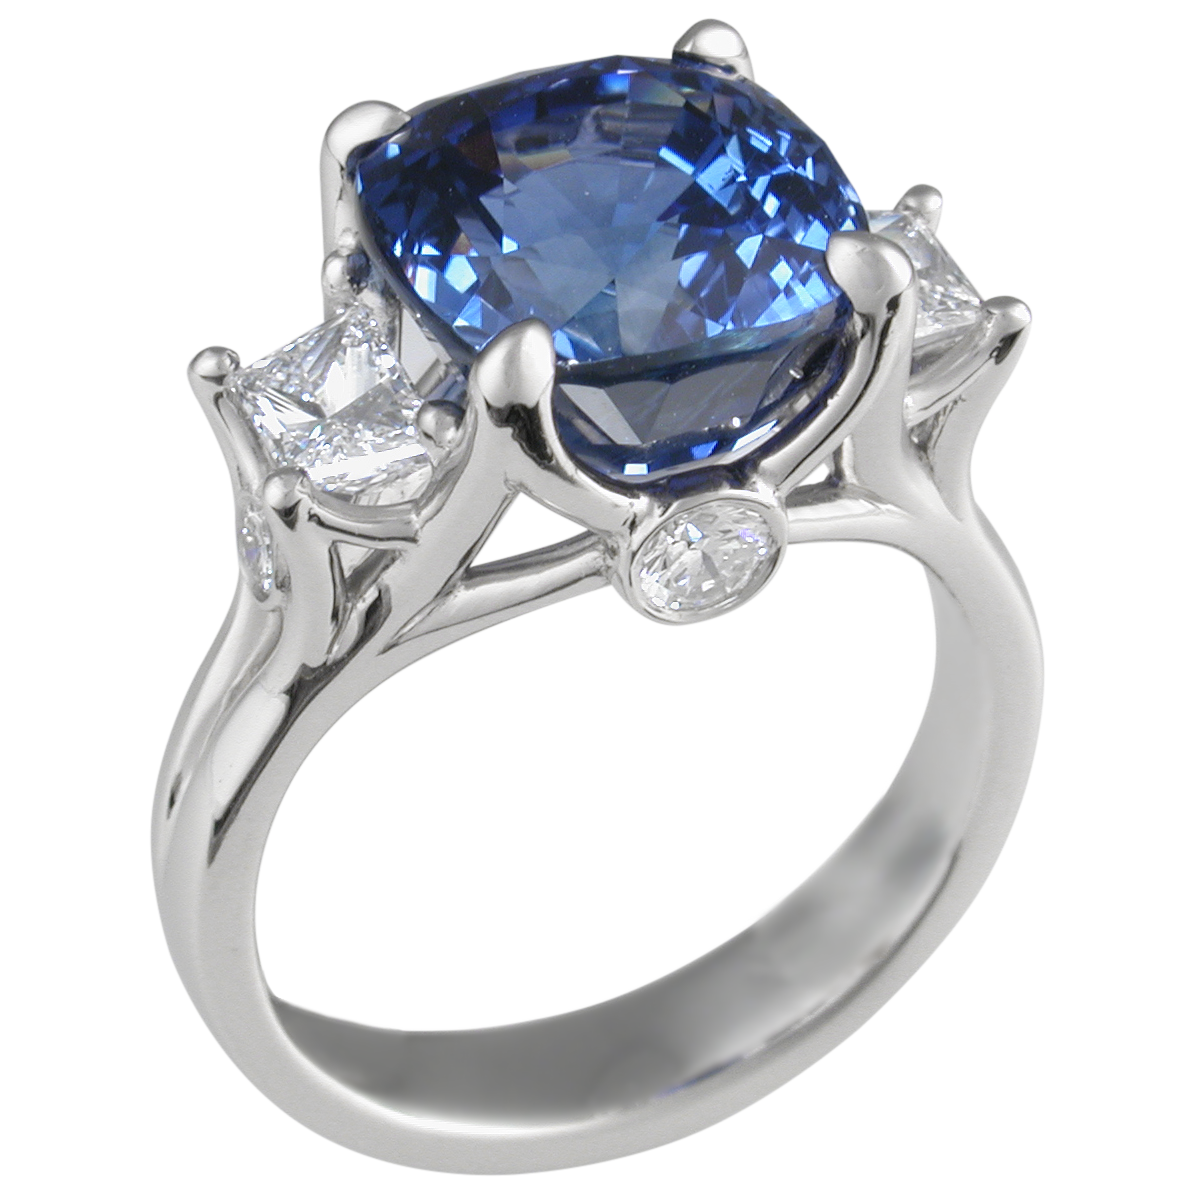 Jewelry clipart sapphire ring. Png images free download